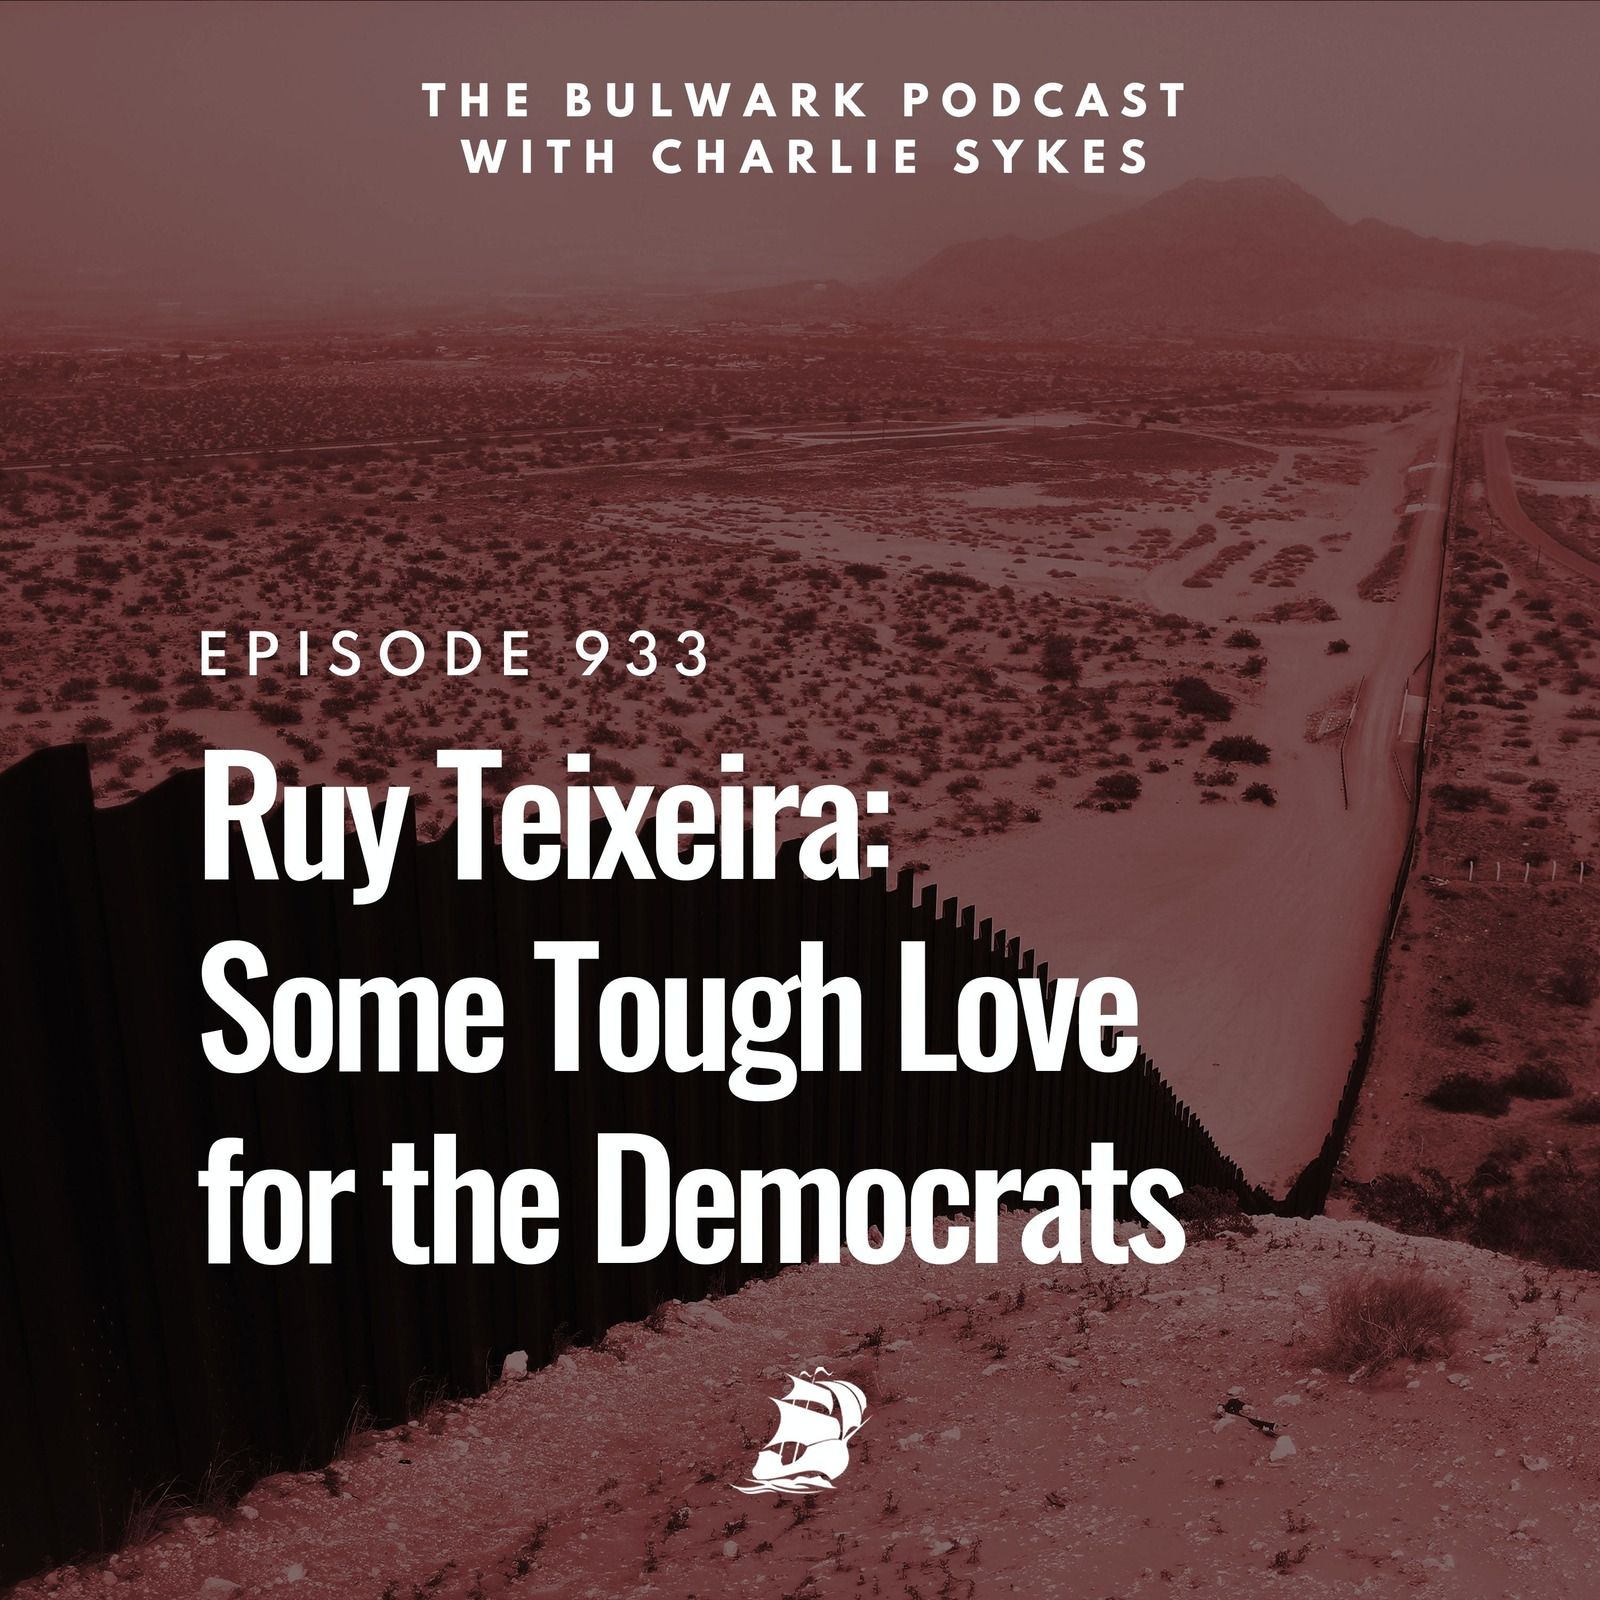 Ruy Teixeira: Some Tough Love for the Democrats by The Bulwark Podcast